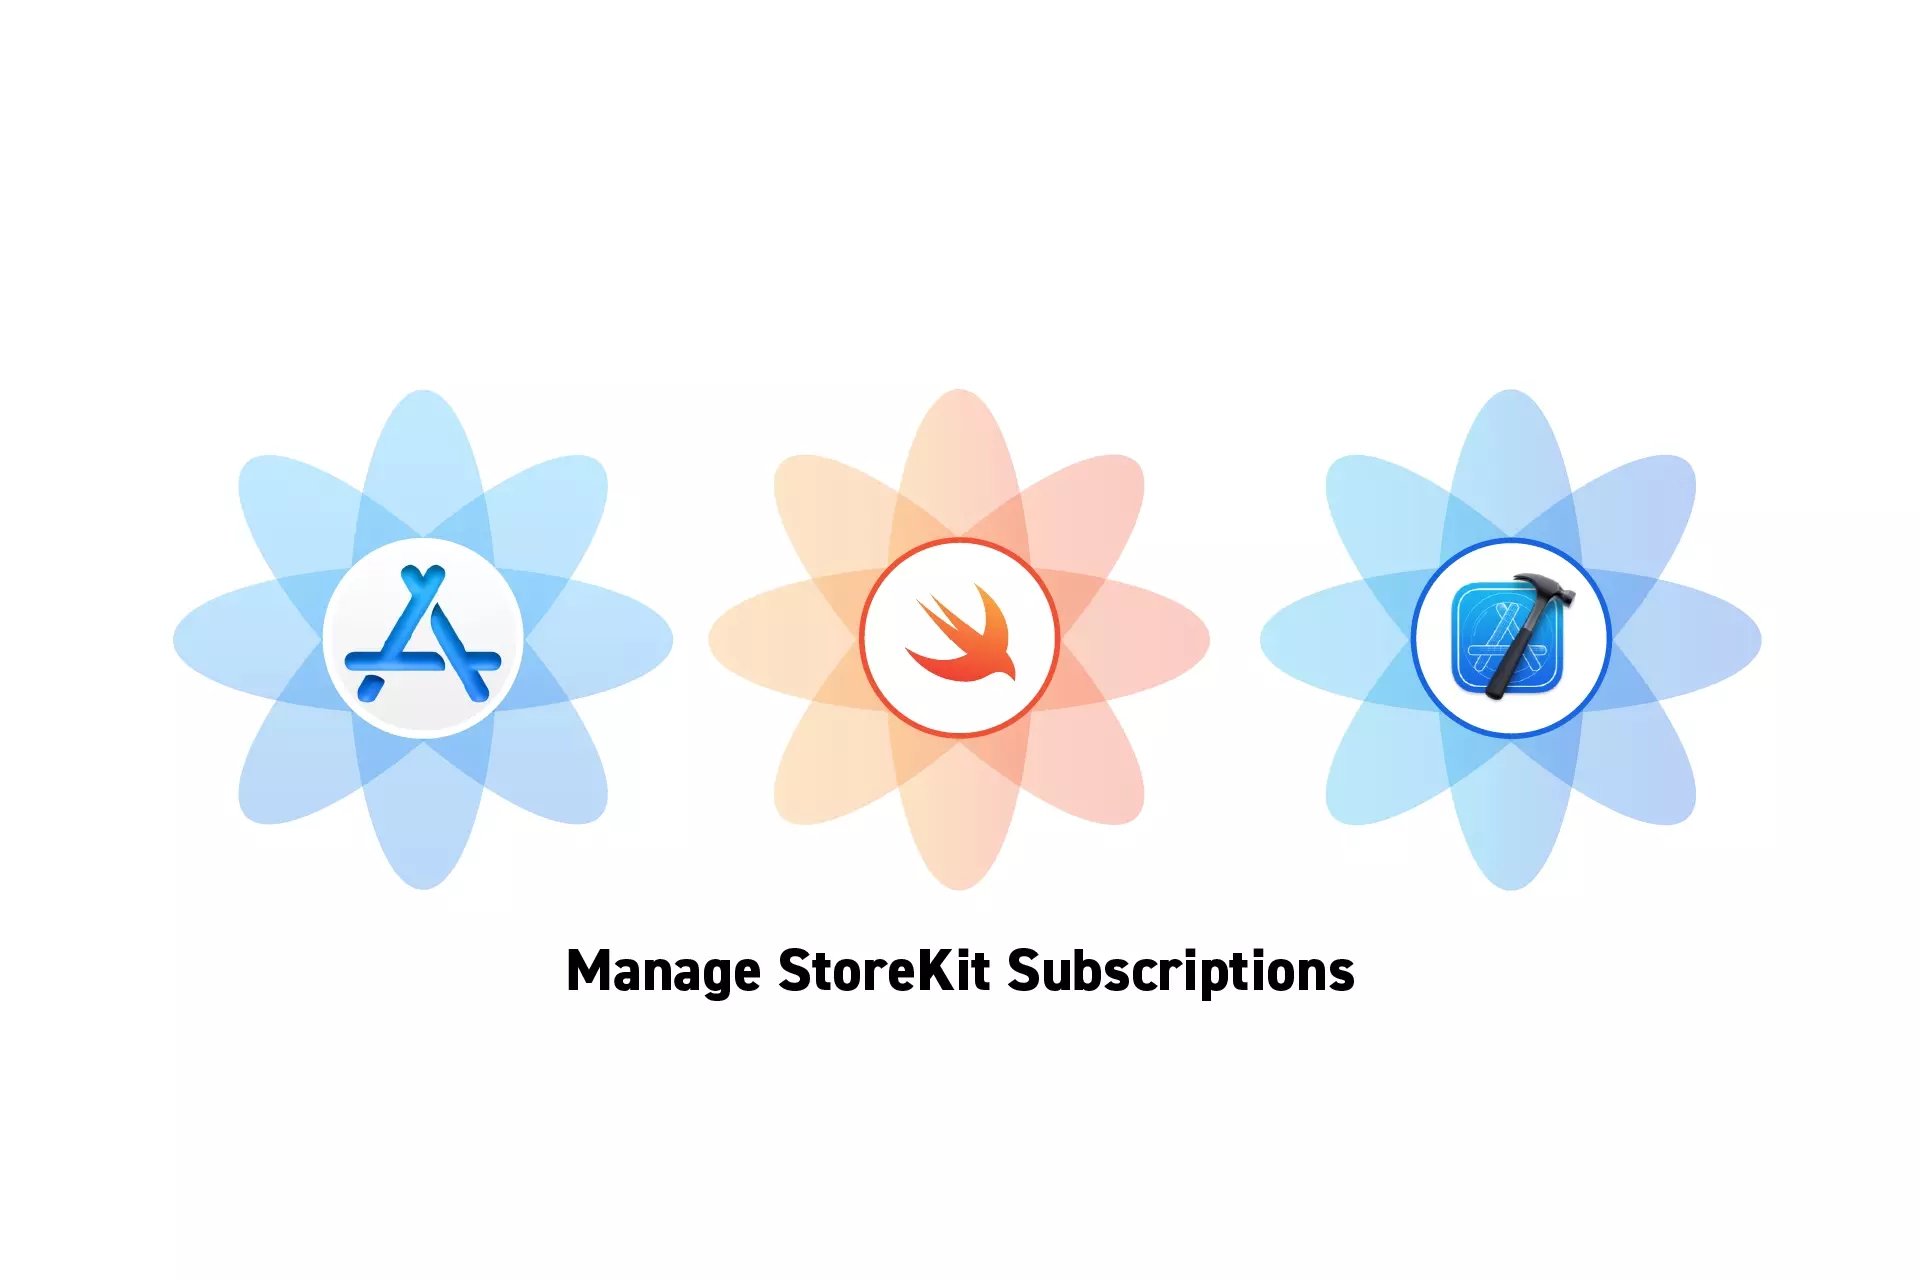 Three flowers that represent StoreKit, Swift and XCode side by side. Beneath them sits the text “Manage StoreKit Subscriptions.”